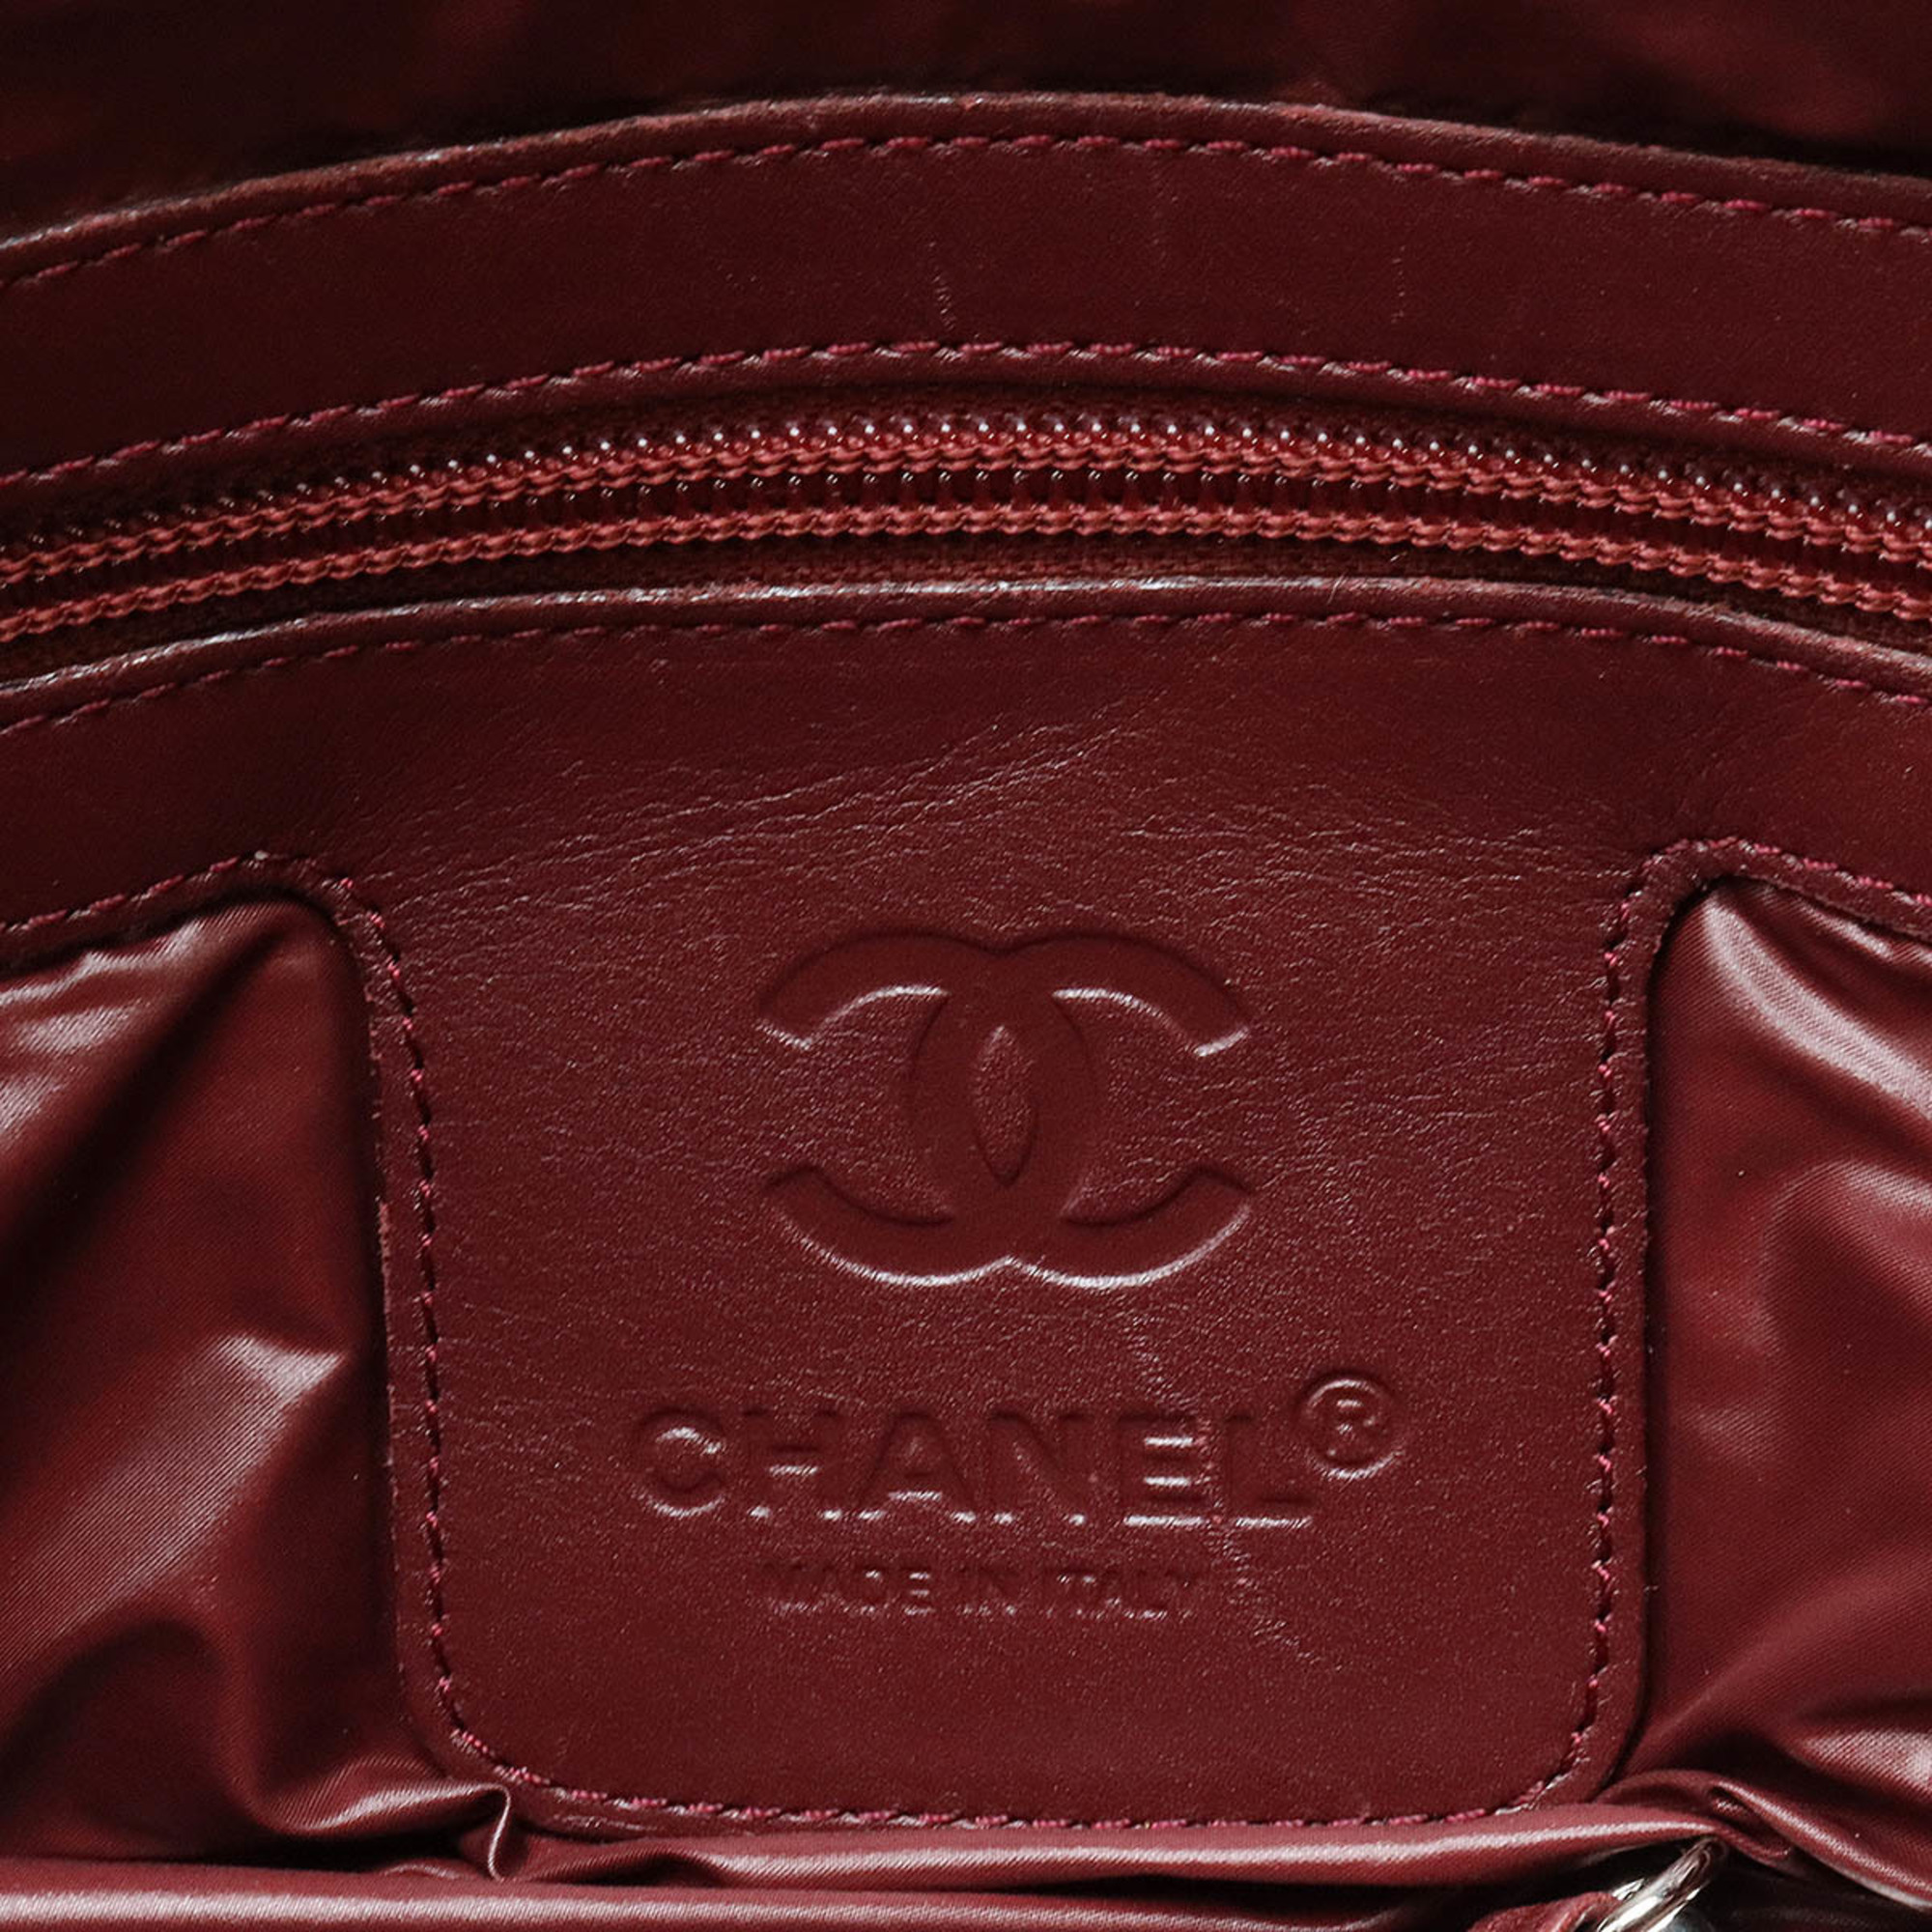 CHANEL Cococoon Quilted Tote Bag Handbag Boston Nylon Leather Black Bordeaux 8619